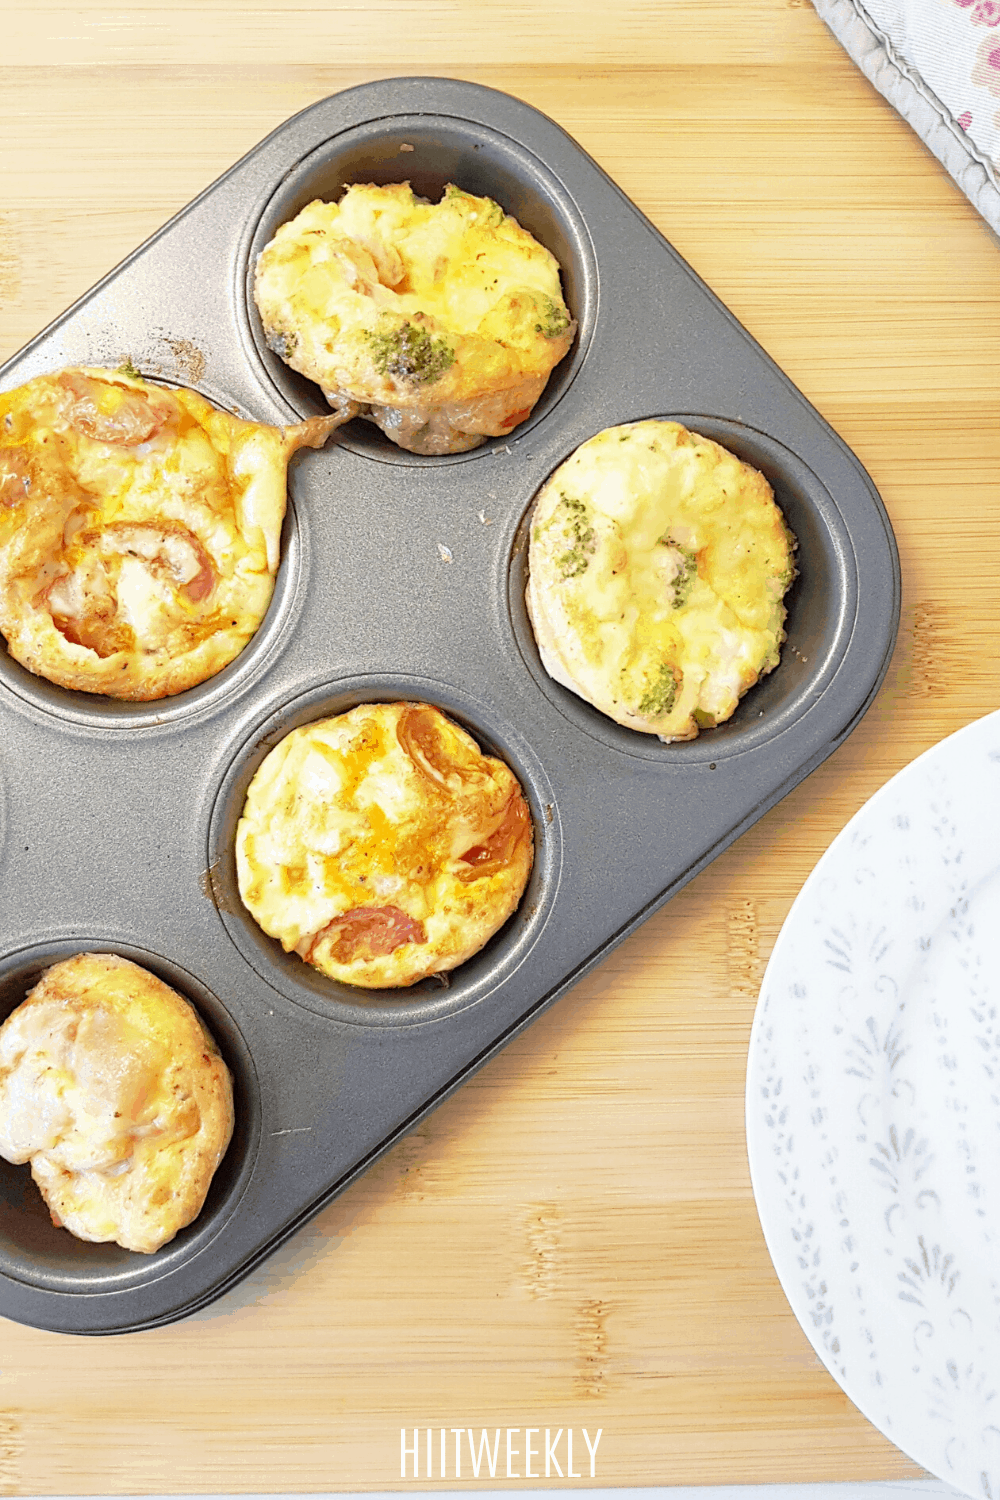 Yummy Breakfast Egg Muffins 3 Ways | High Protein | Meal Prep | HIIT WEEKLY